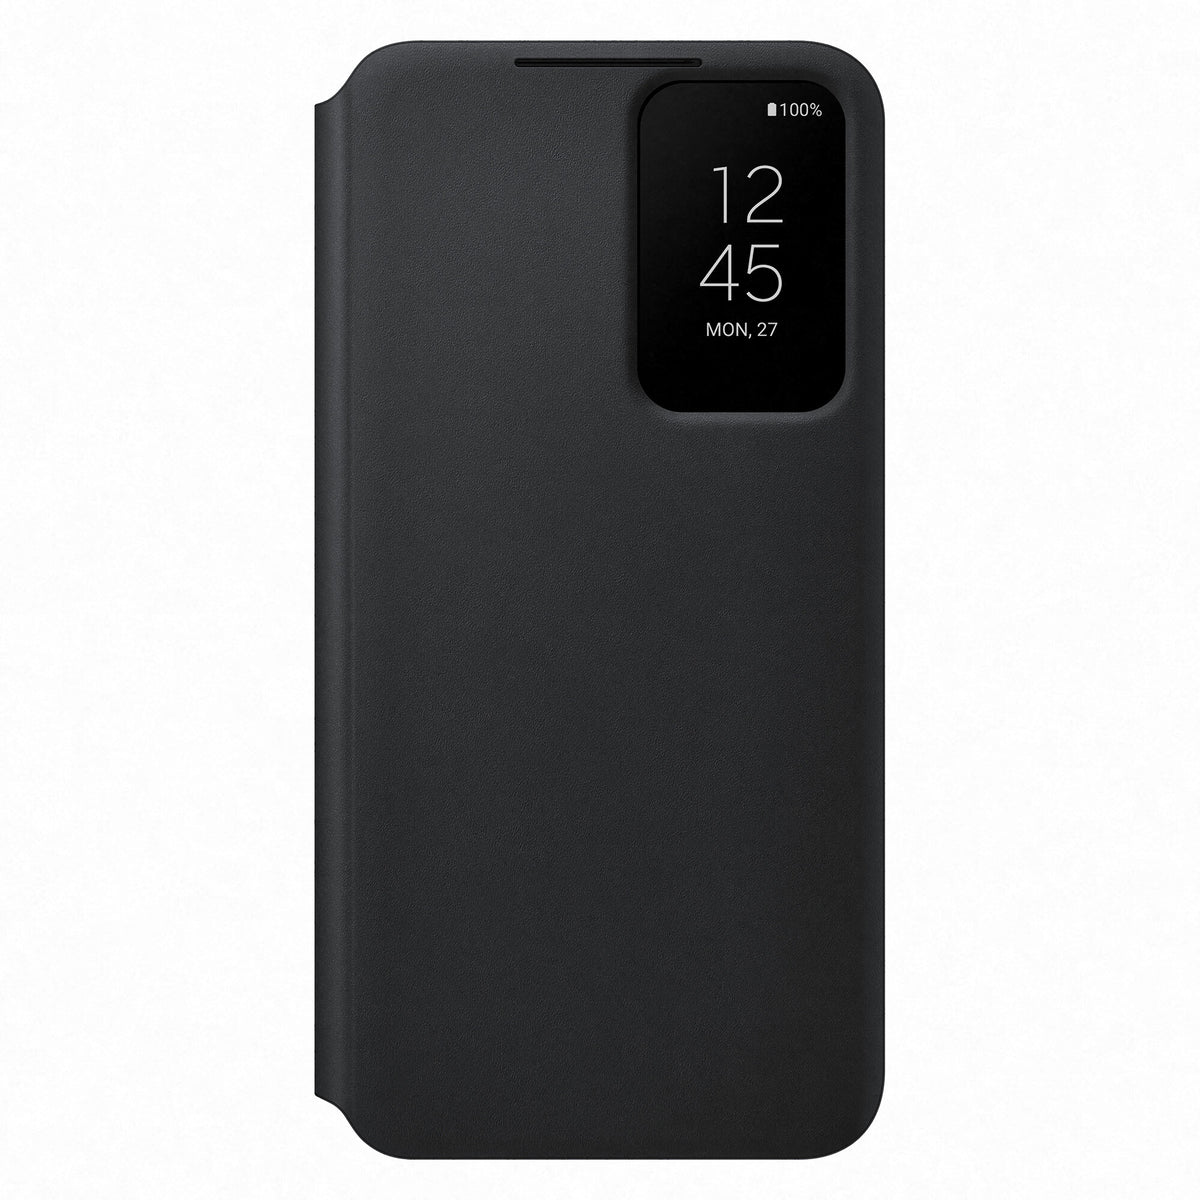 Samsung mobile phone flip case for Galaxy S22 in Graphite